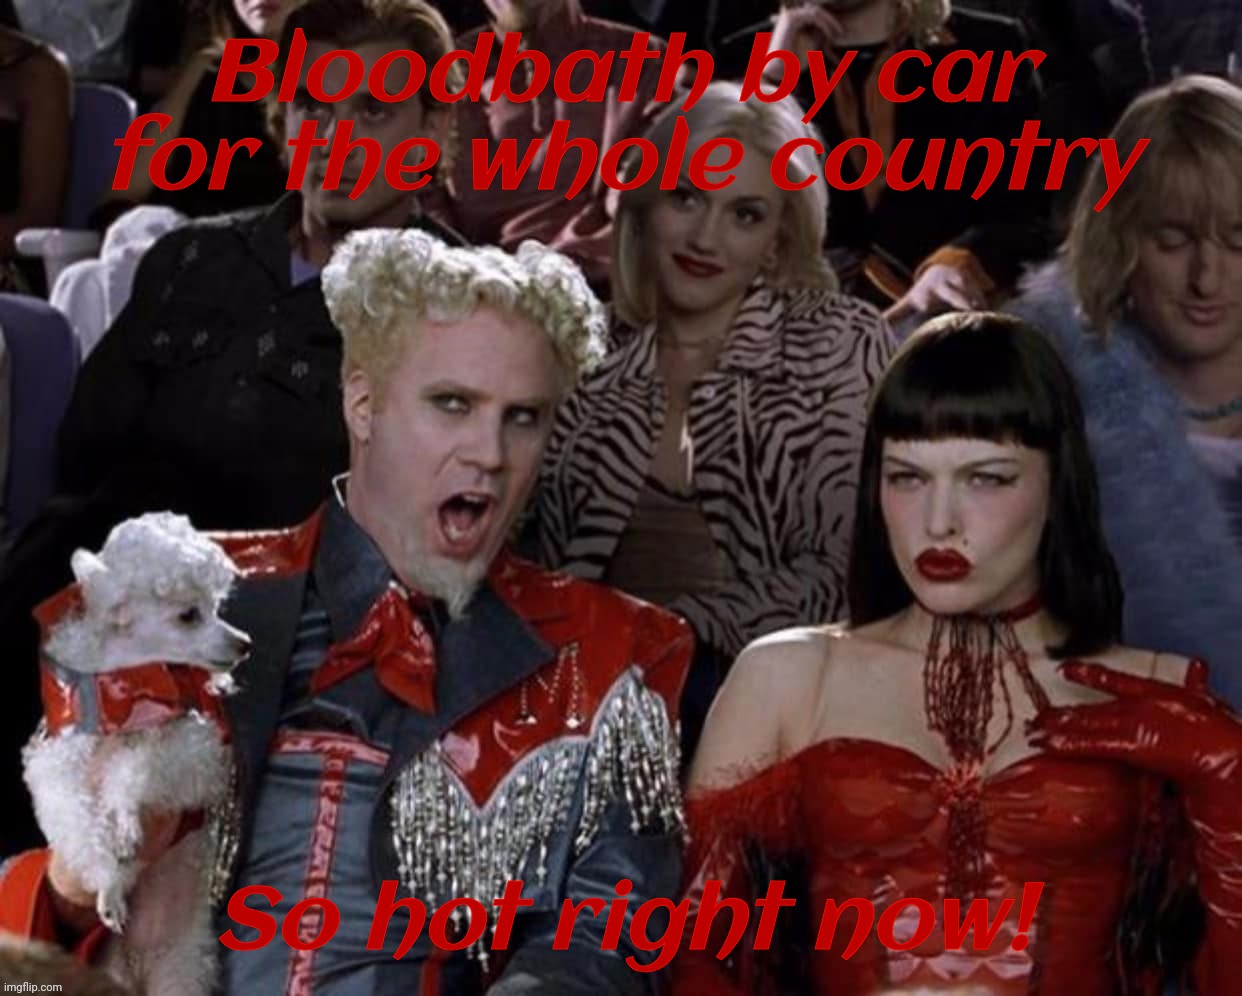 100% Chinese cars from Mexico are bloodbath machines,,, Something like that. | Bloodbath by car for the whole country; So hot right now! | image tagged in mugatu so hot right now,so hot right now,trump,donald trump,donald trump bloodbath,chinese cars are lethal killing machines | made w/ Imgflip meme maker